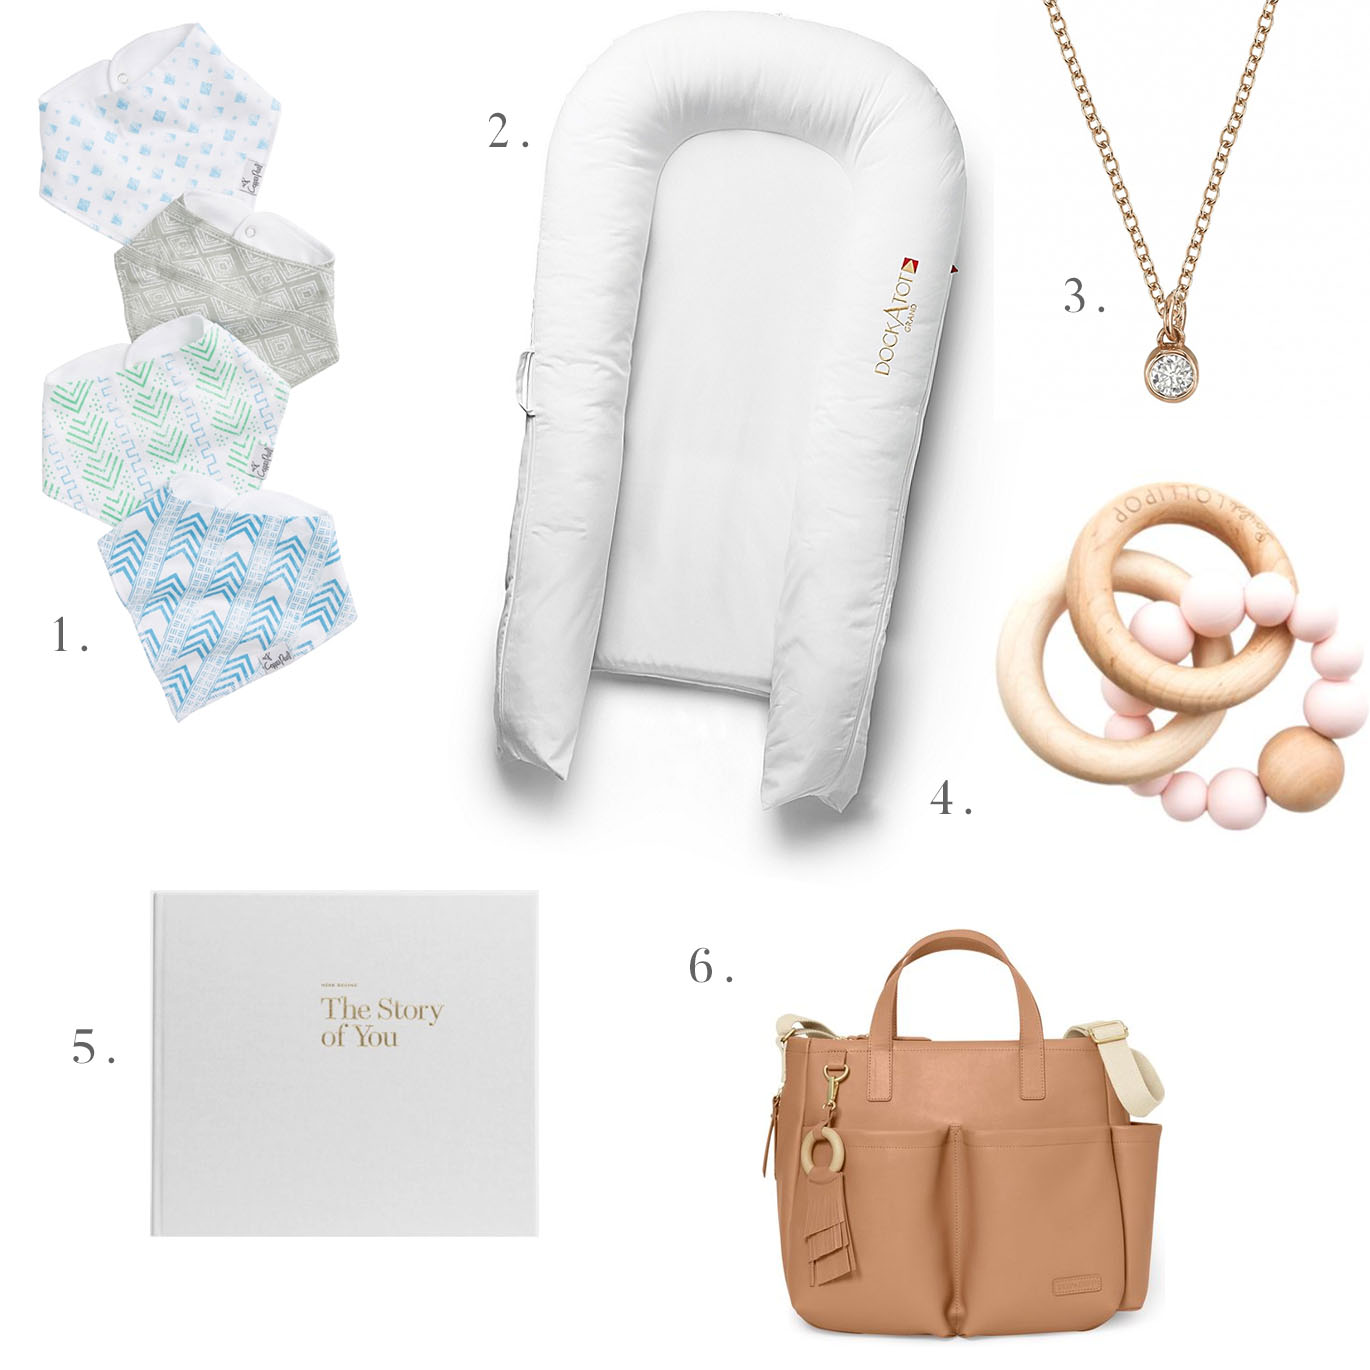 My Top 10 Baby Shower Gifts — bluegrass redhead